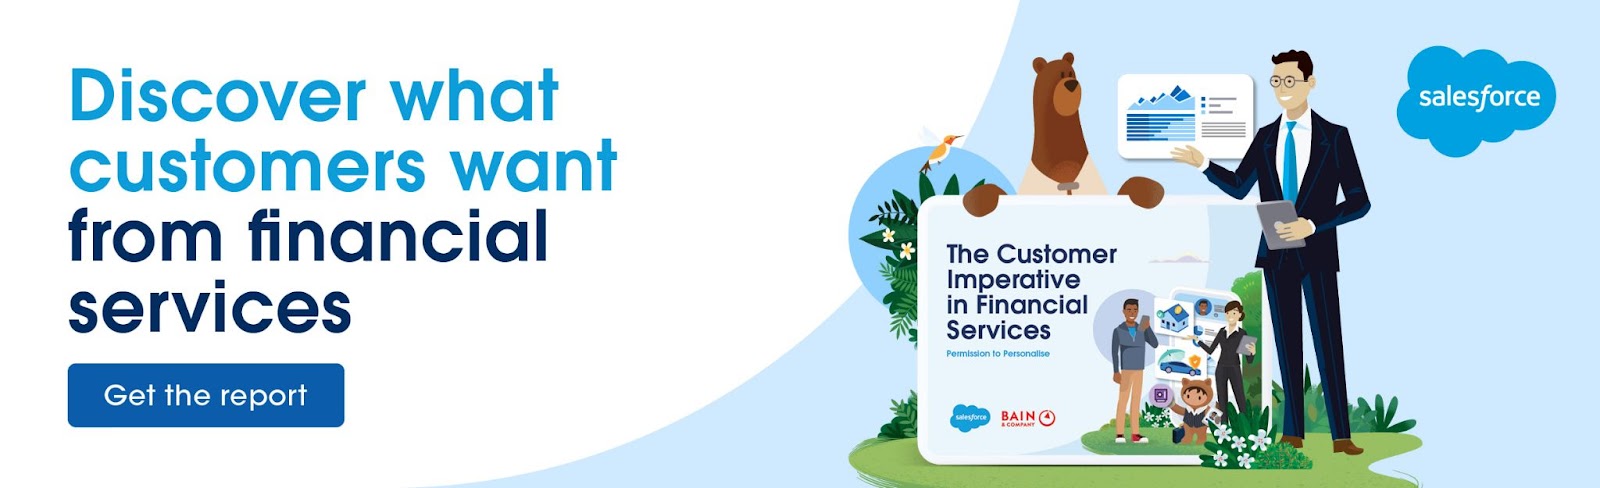 You can hear the rest of the insights from our conversation on Salesforce+, but be sure to check out the report, The Customer Imperative in Financial Services, to understand the roles of trust, personalisation and digitisation.